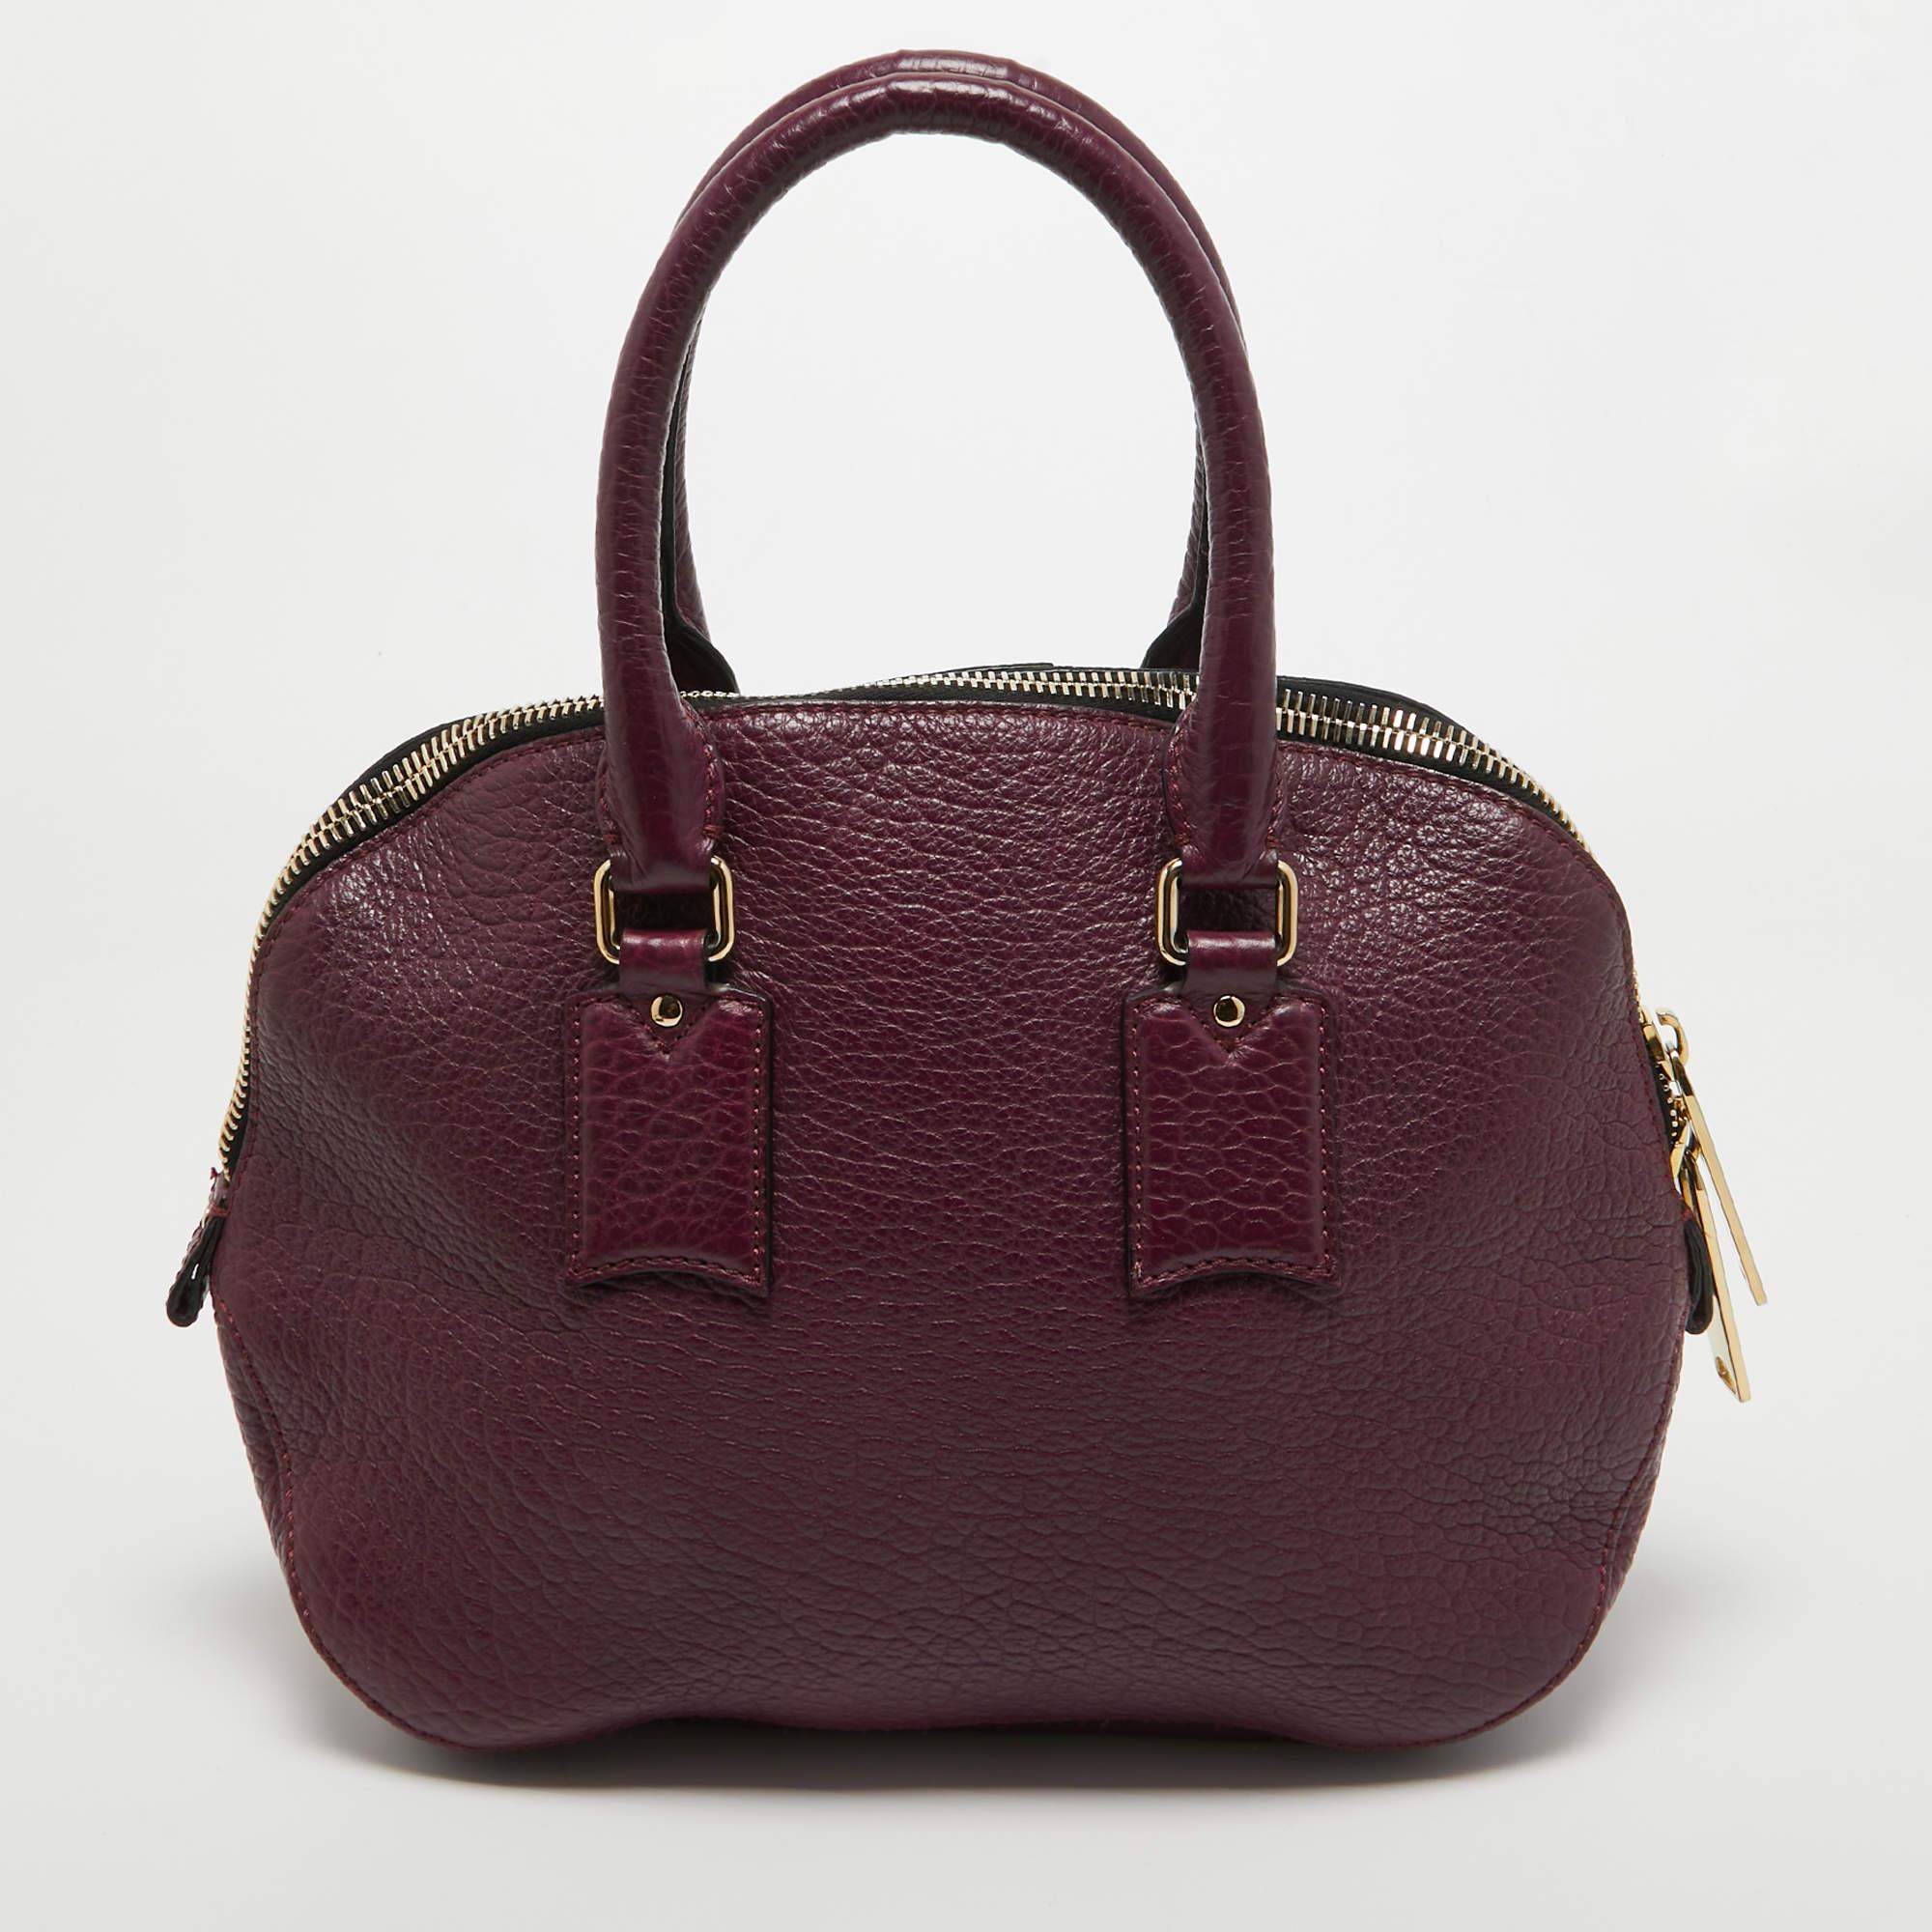 Expertly crafted and skillfully designed, this Burberry creation is a must-have in every bag collection. It is made from purple leather. Features like the two comfortable handles, detachable shoulder strap, and spacious fabric interior make it a